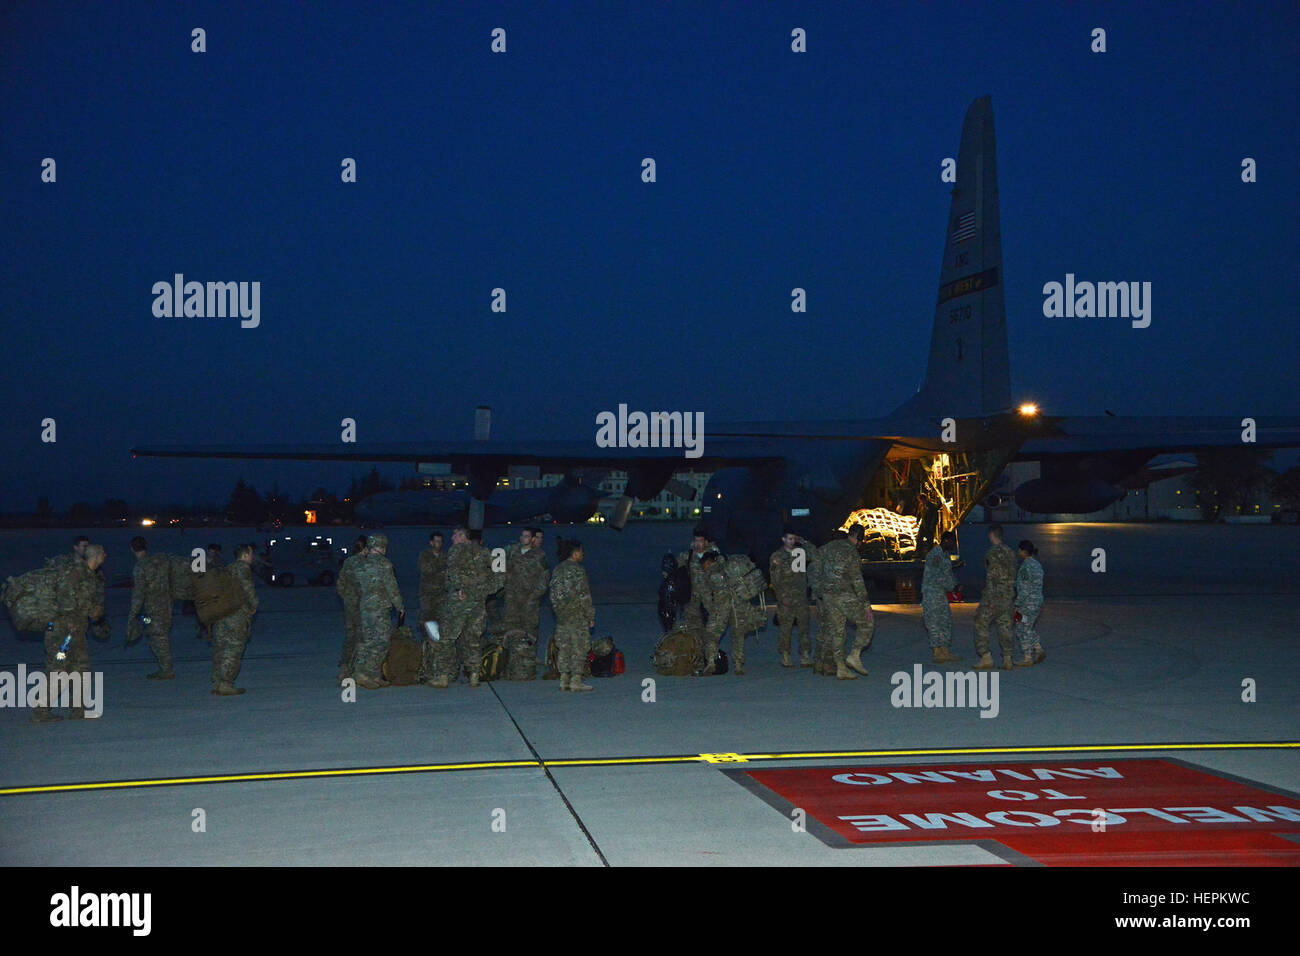 U.S. paratroopers of the 1st Battalion, 503rd Infantry Regiment, 173rd Airborne Brigade arrive at Aviano Air Base, Italy, after five months  training in Lithuania during Operation Atlantic Resolve, on board a U.S. Air Force West Virginia Air National Guard C-130 Hercules aircraft, Nov 3, 2015. The 173rd Airborne Brigade is the Army Contingency Response Force in Europe, capable of projecting ready forces anywhere in the U.S. European, Africa or Central Commands areas of responsibility within 18 hours. (U.S. Army photo by Visual Information Specialist Paolo Bovo/Released) Bayonet Thrust 151103-A Stock Photo